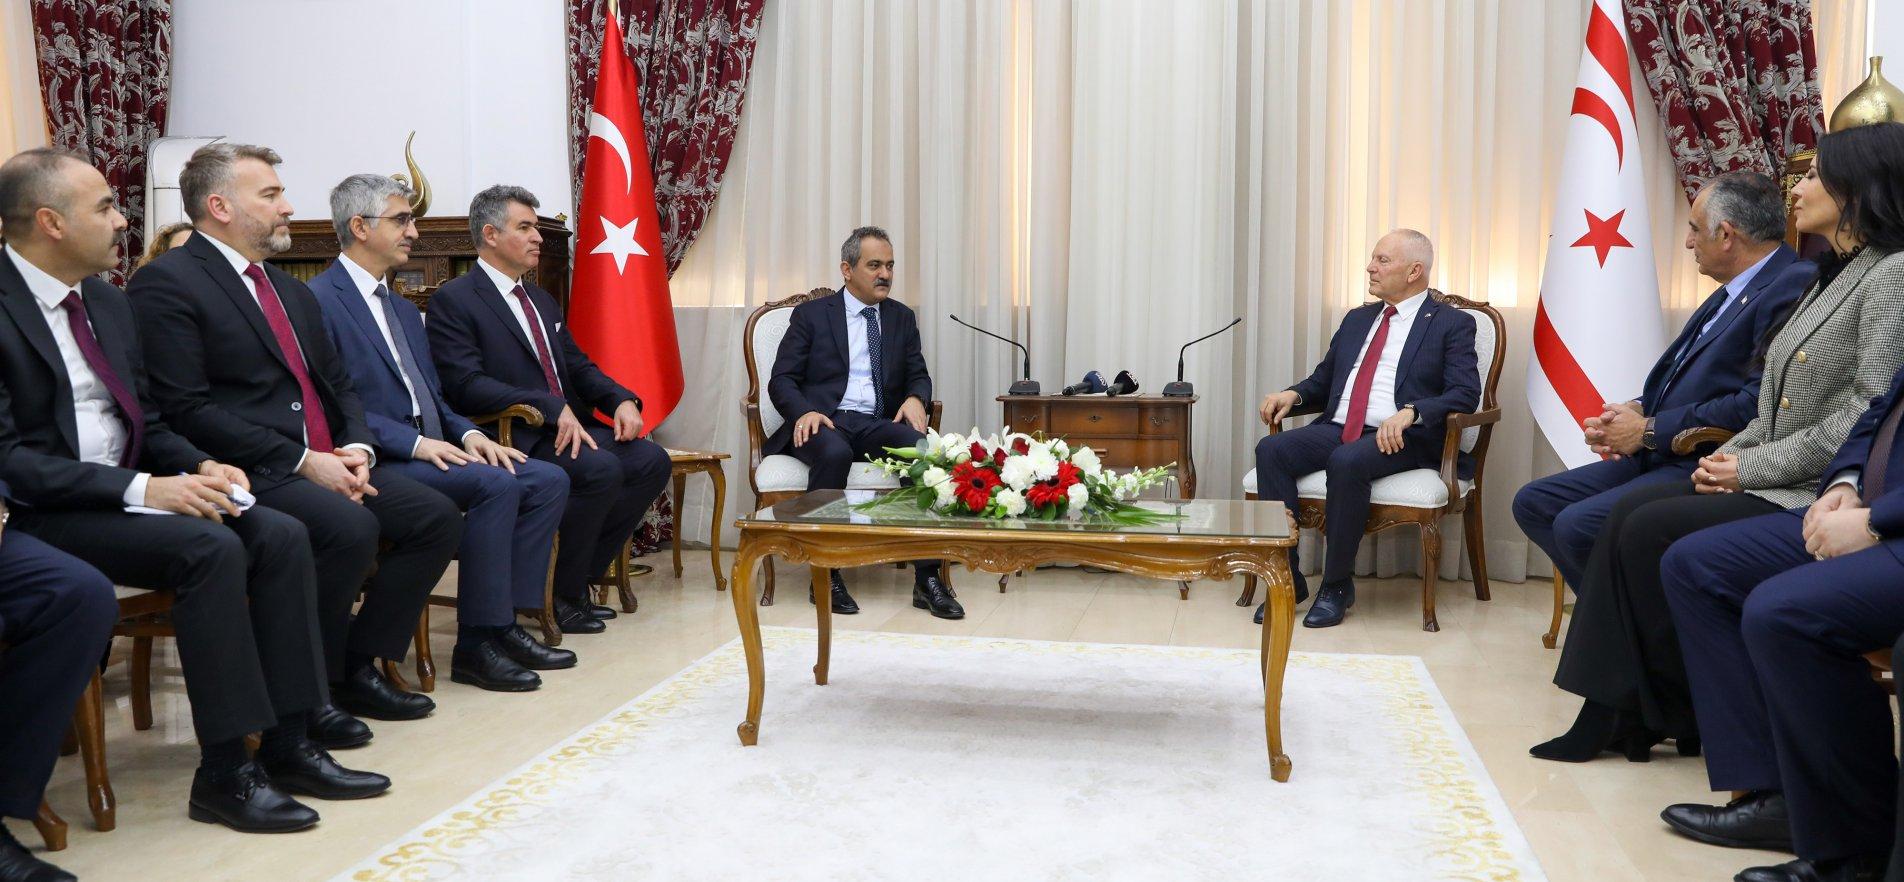 MINISTER OZER MEETS WITH THE PARLIAMENTARY SPEAKER OF THE TRNC ZORLU TÖRE